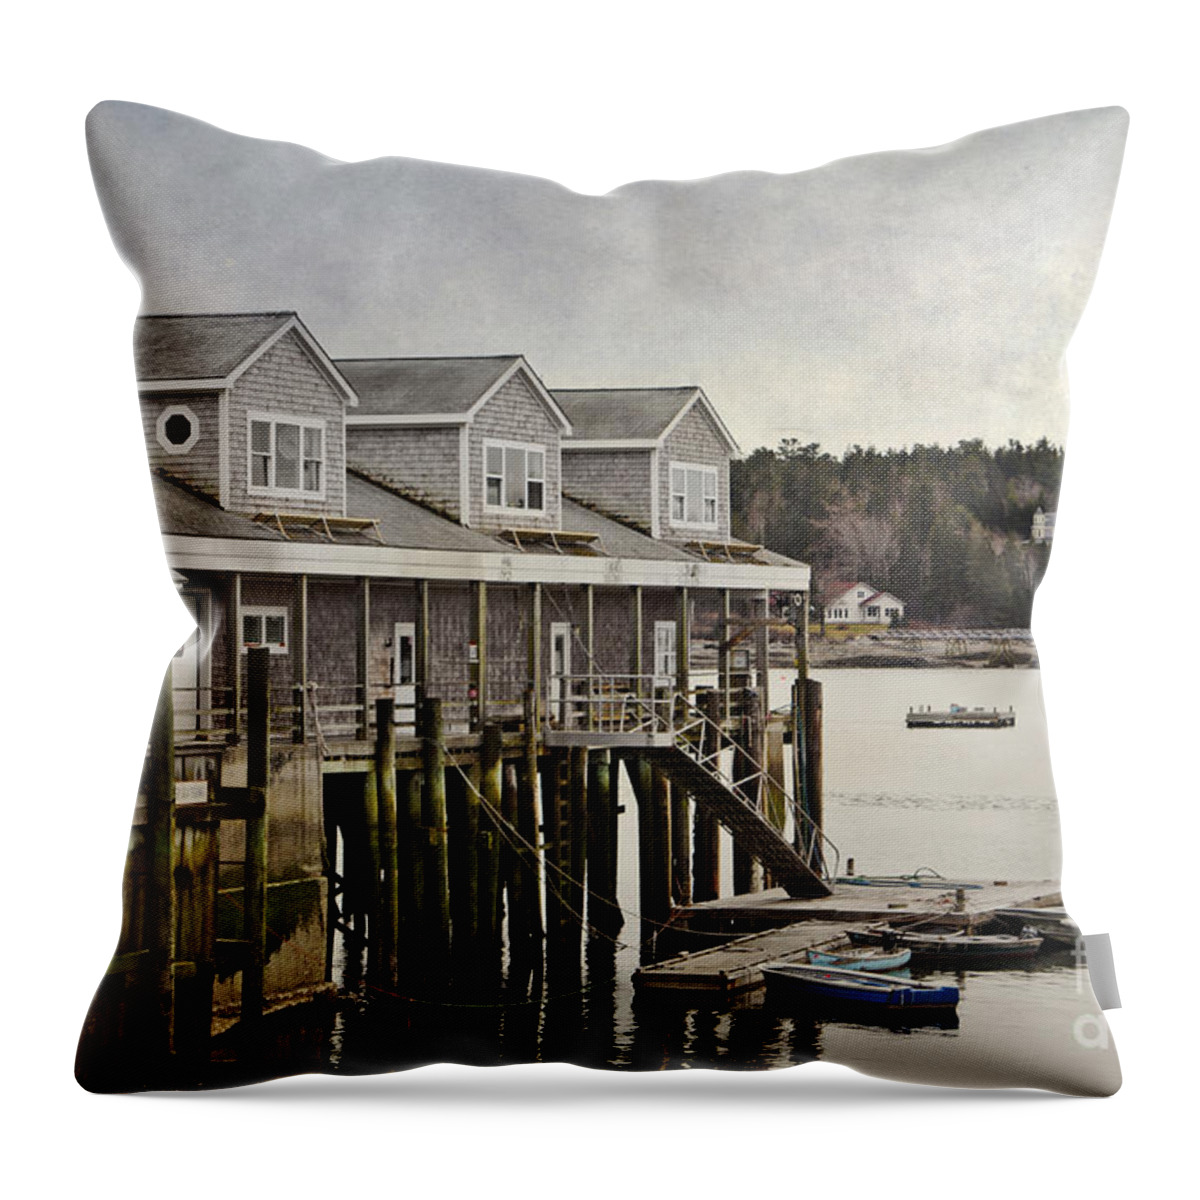 Maine Throw Pillow featuring the photograph Harbor Village by Karin Pinkham